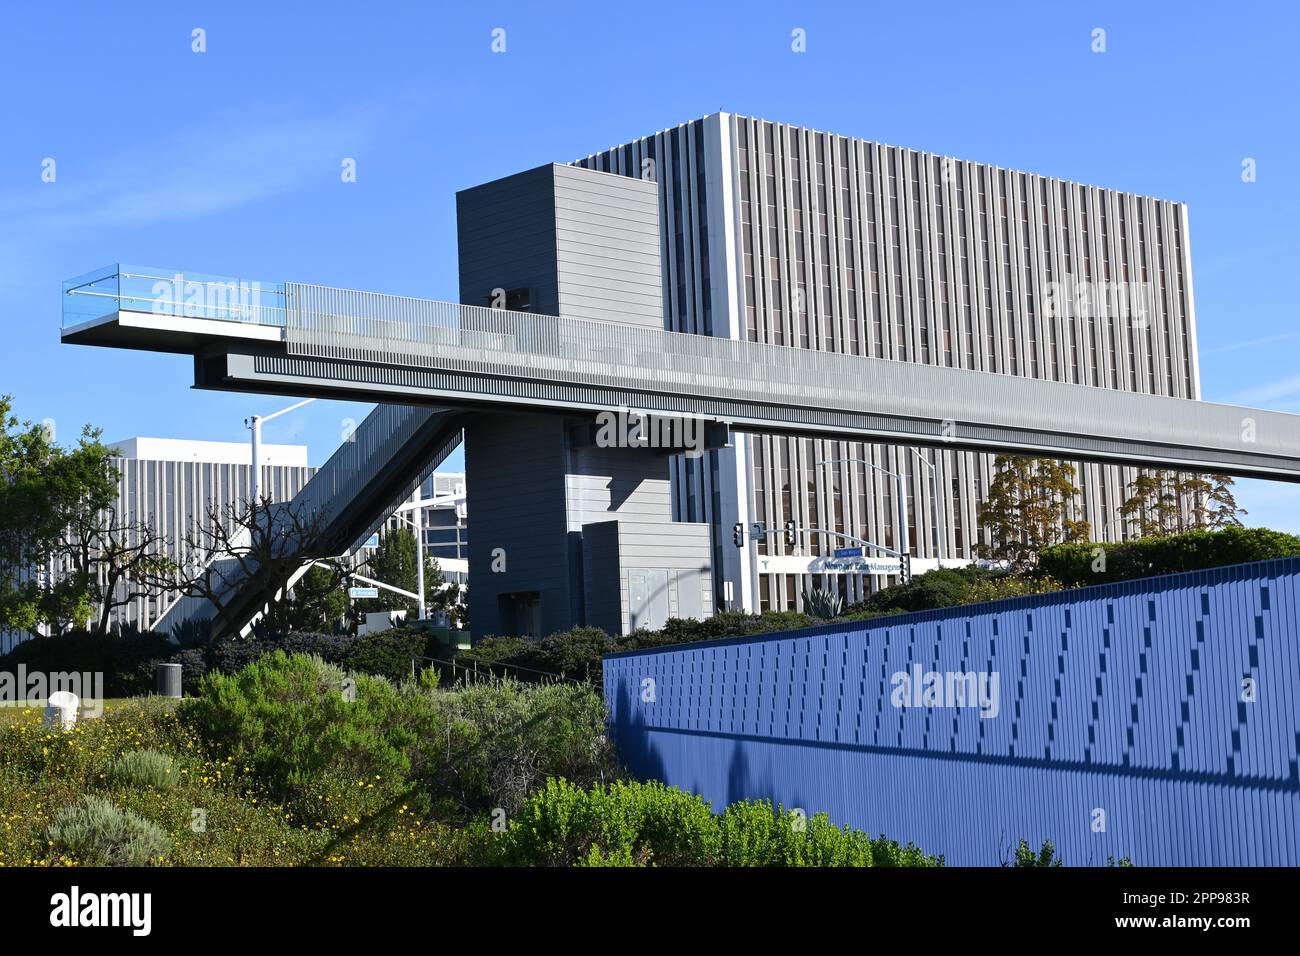 NEWPORT BEACH, CALIFORNIA - 22 APR 2023: Pedestrian bridge ove San Miguel Drive connecting the two halves of Civic Center Park with office buildings i Stock Photo